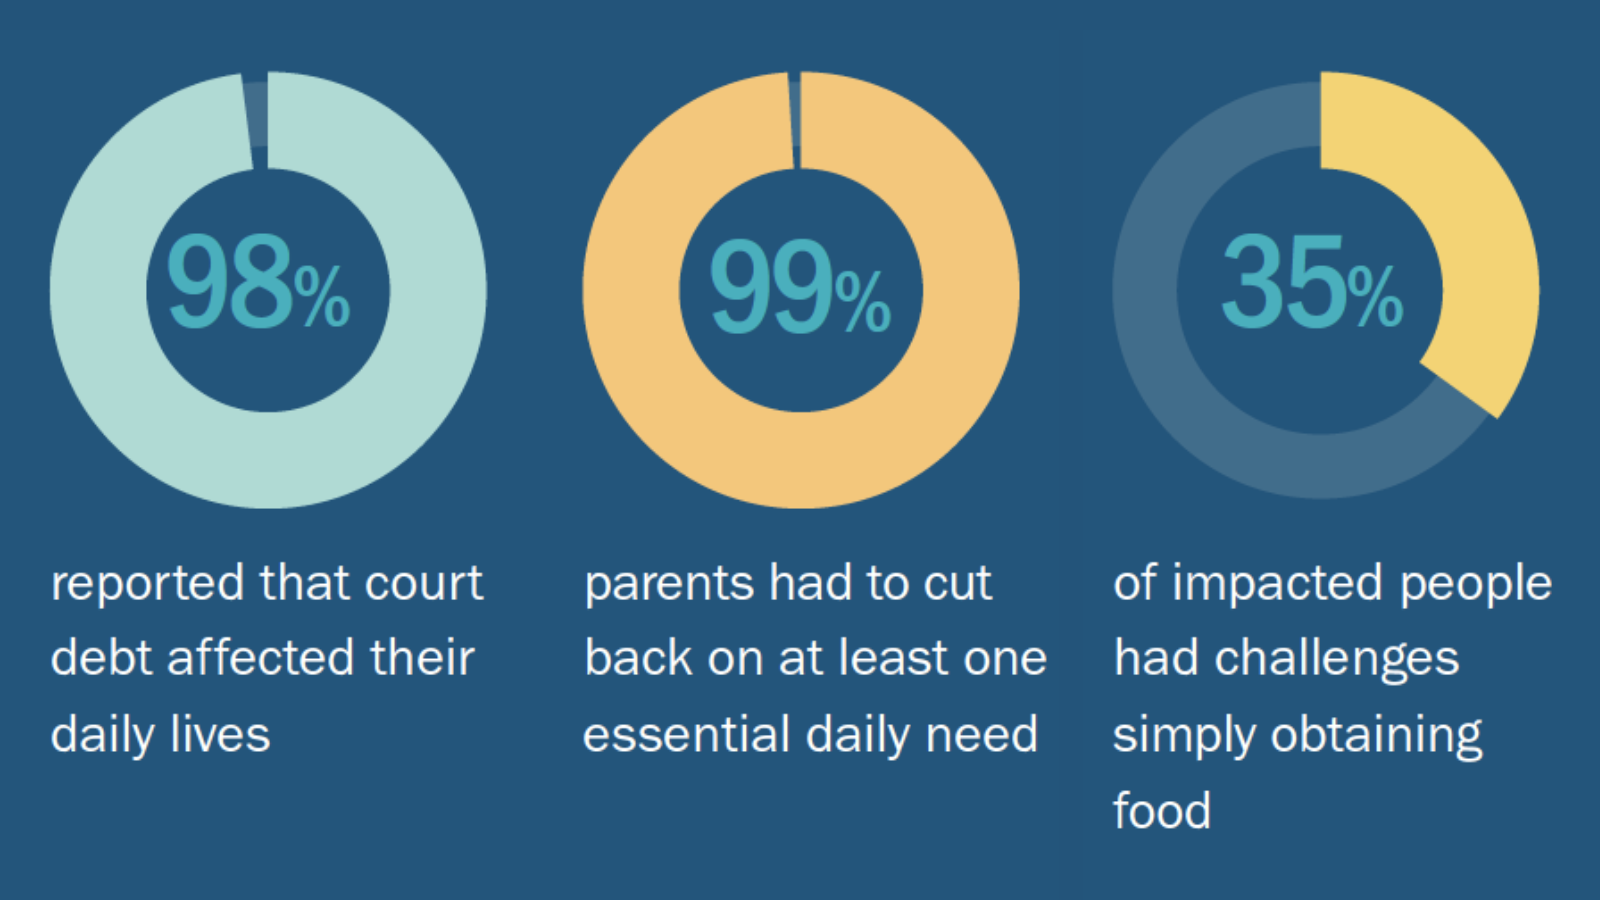 graph showing 98% of people said court debt impacted their daily lives, 99% of parents stated they had to cut back on an essential need, and 35% of people said they had trouble accessing food.